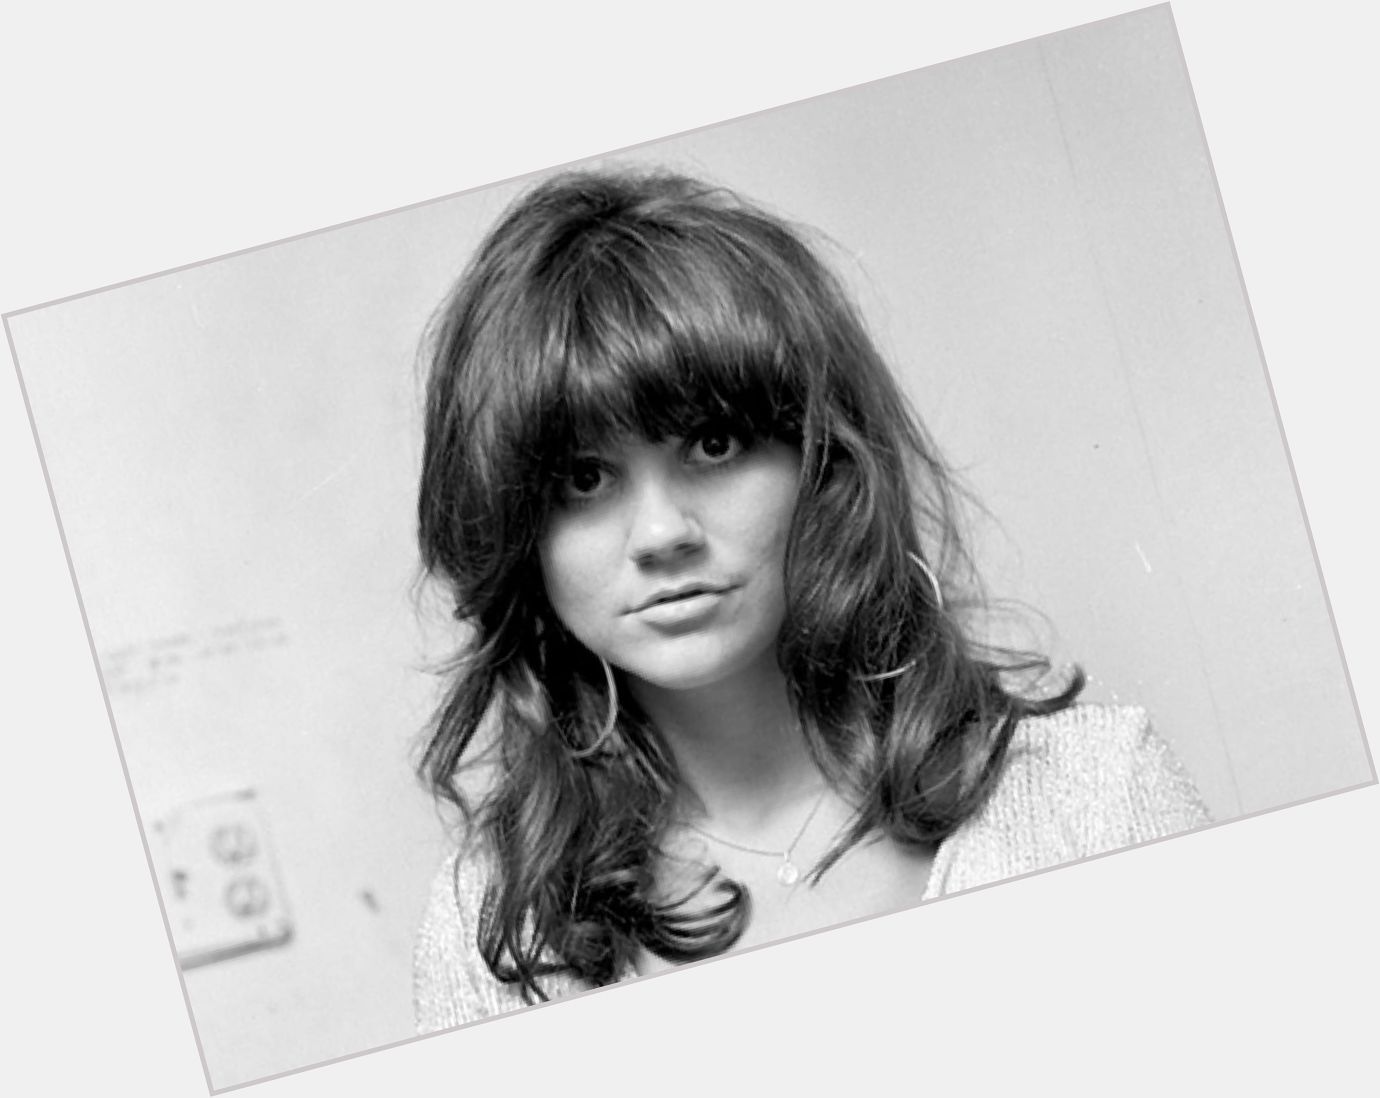 Wishing a happy 73rd birthday to the one and only Linda Ronstadt  